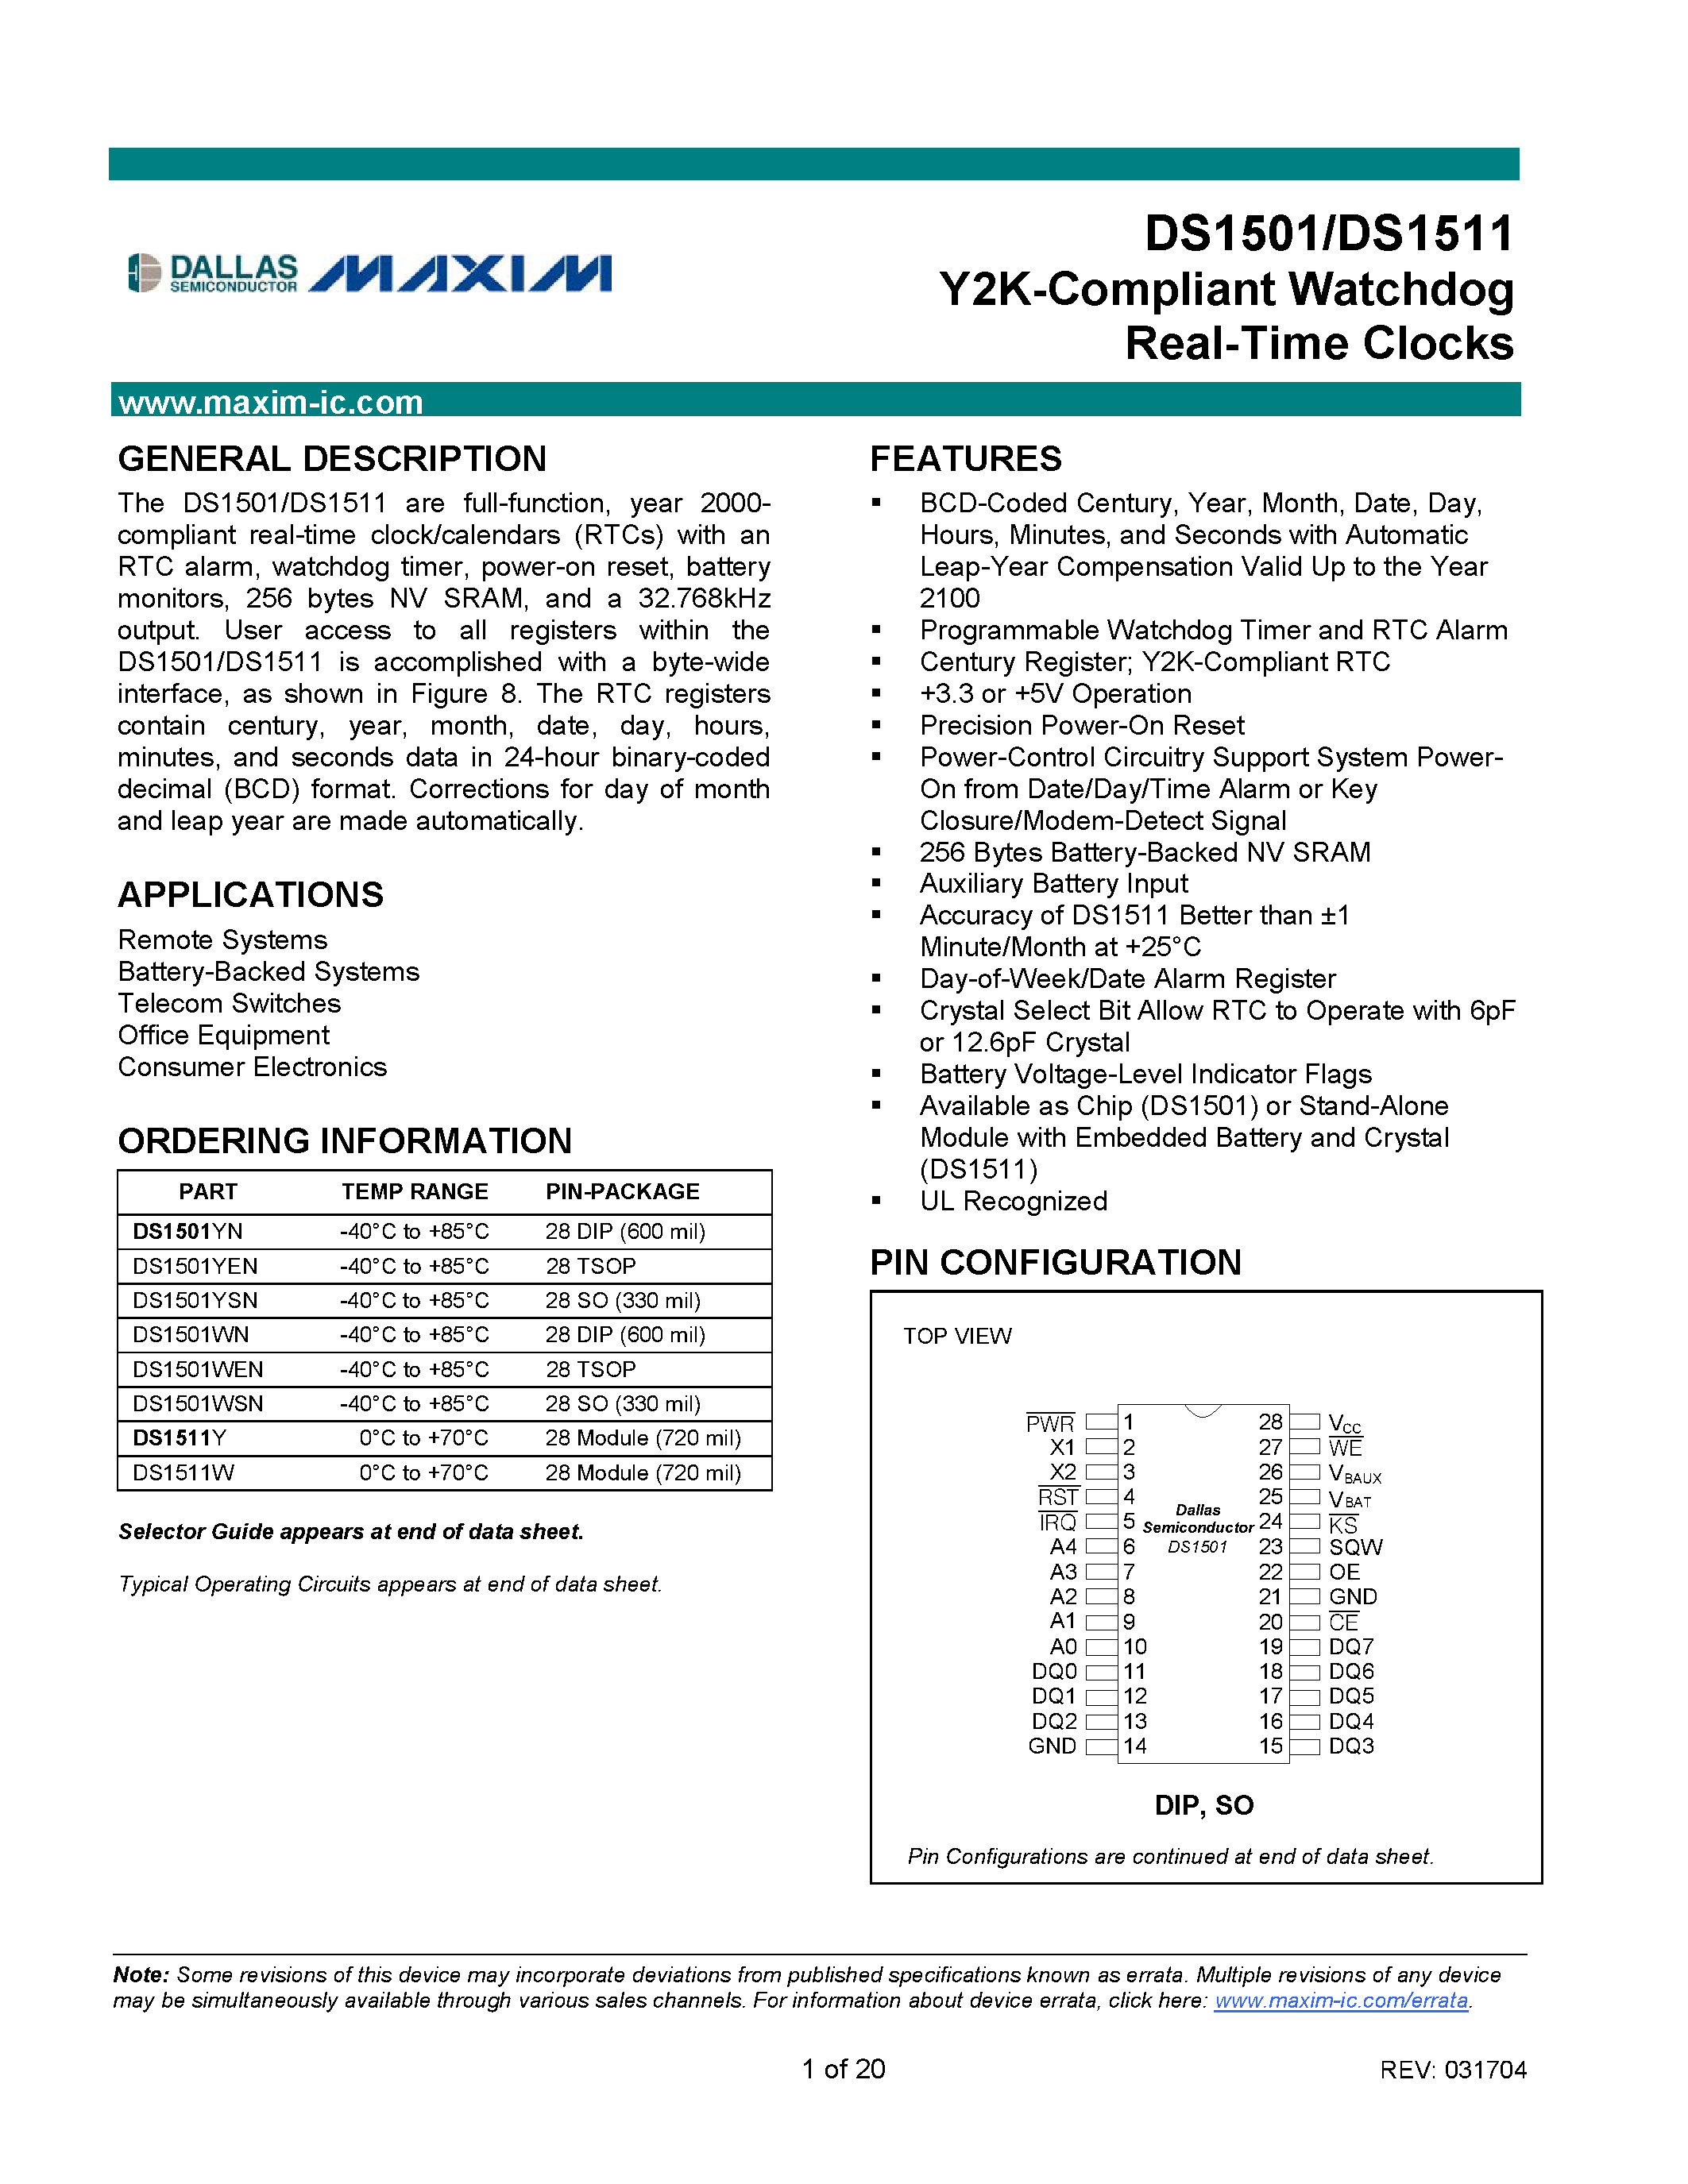 Datasheet DS1501 - (DS1501 / DS1511) Y2K-Compliant Watchdog Real-Time Clocks page 1